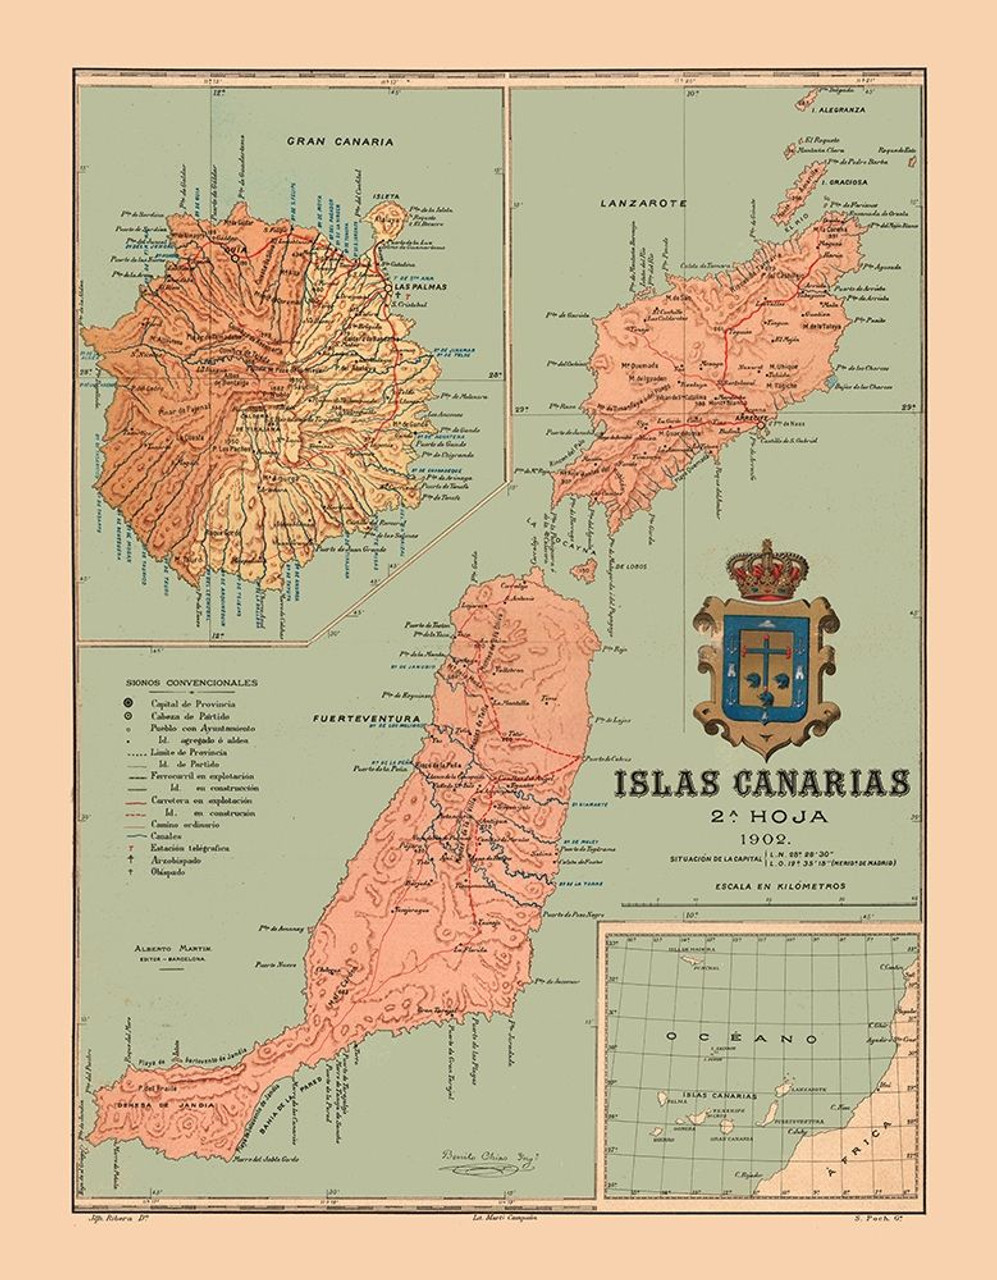 Canary Islands 1902 Africa Spain Martine 1904 Poster Print By Martine